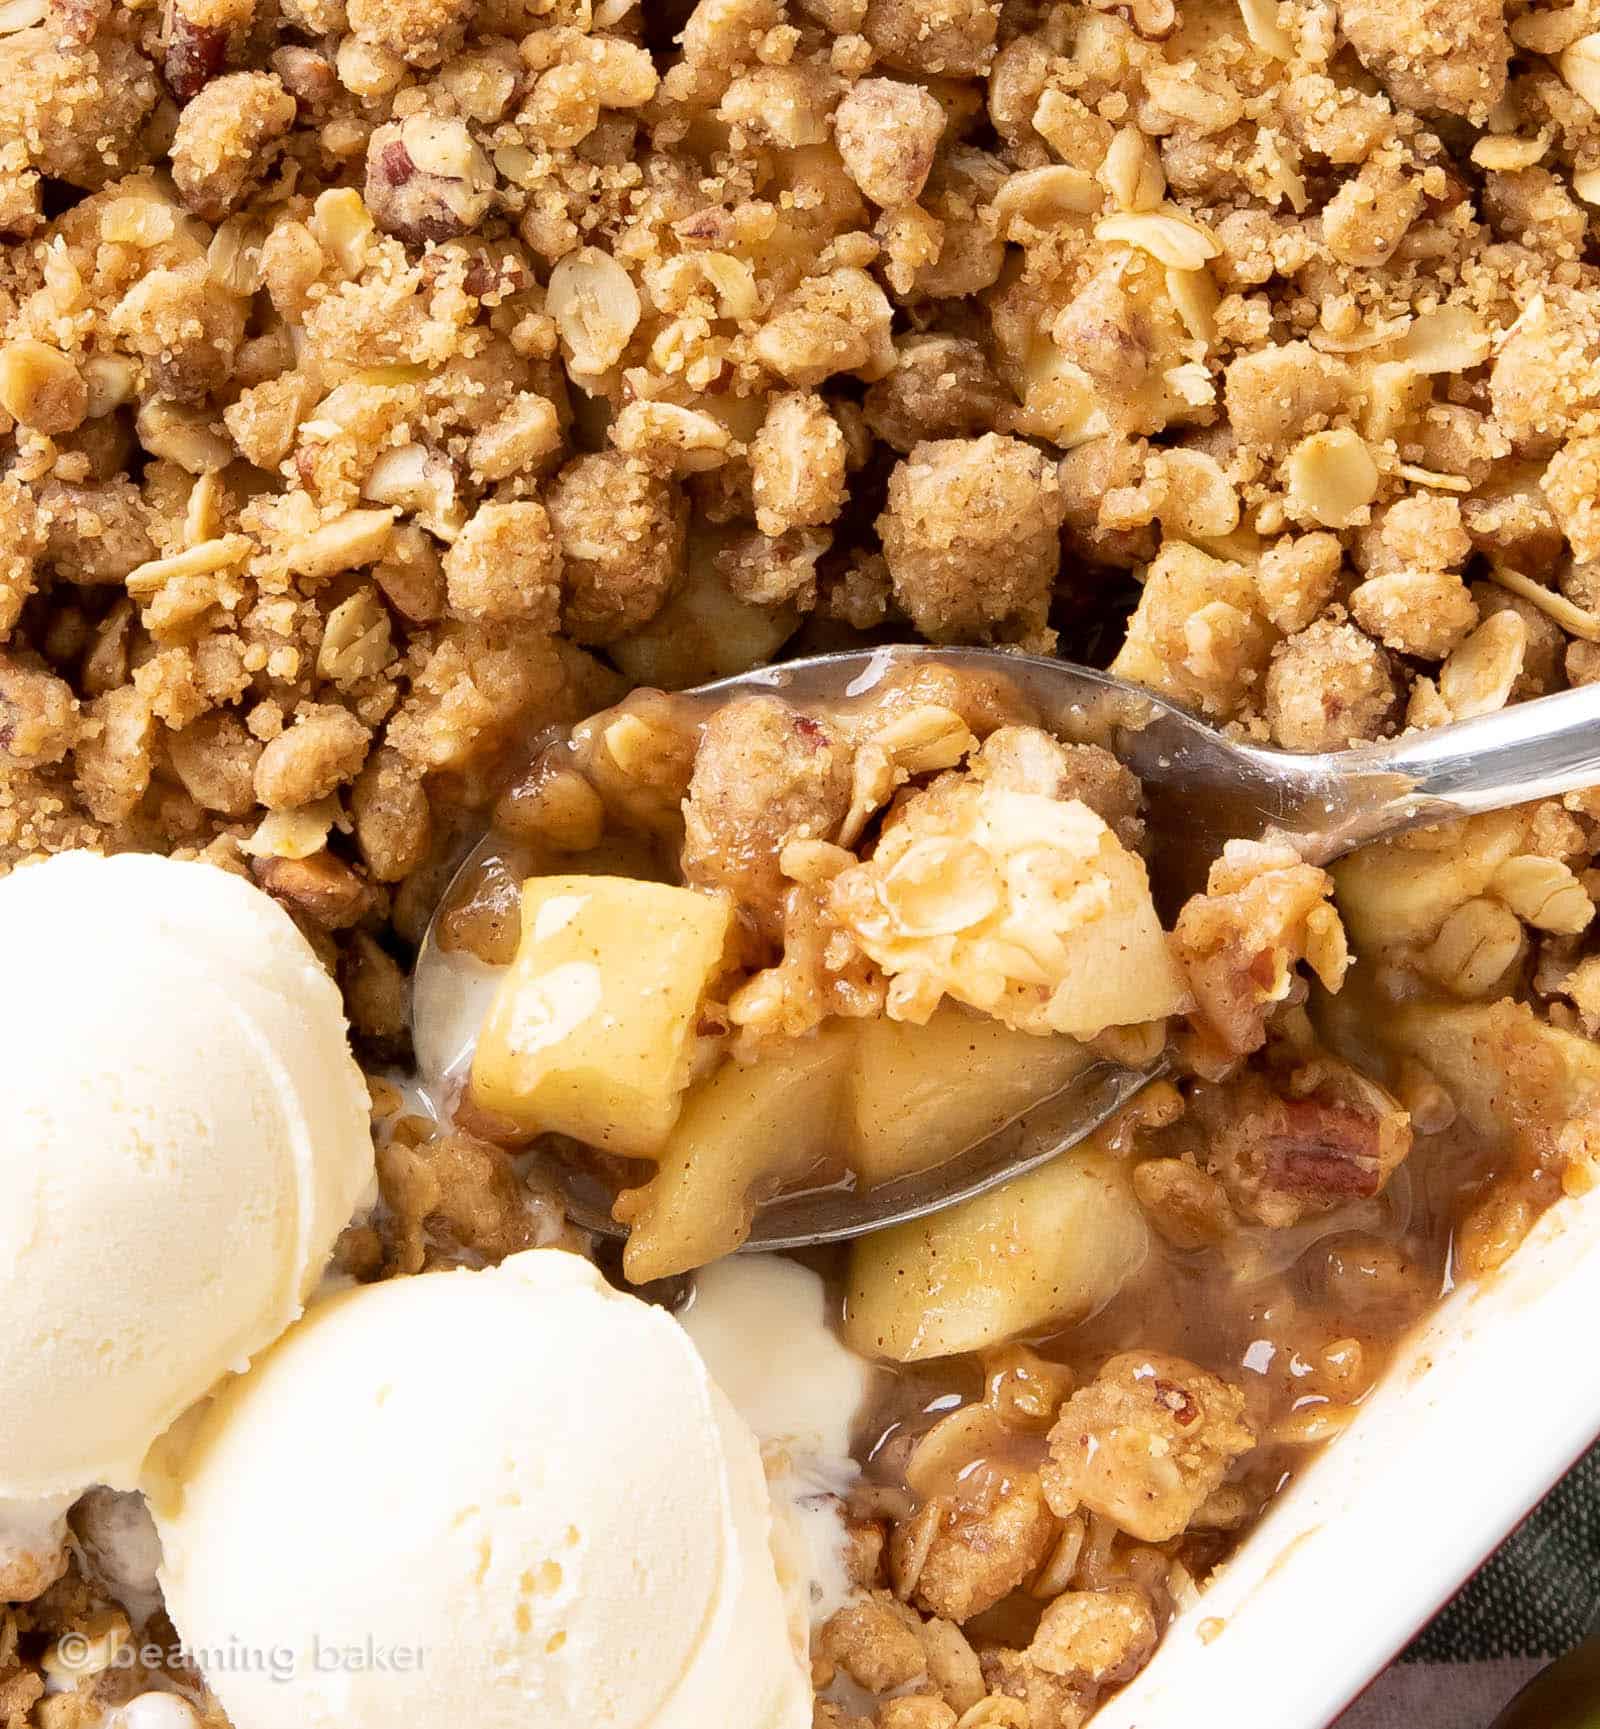 gooey apples peaking out from under brown sugar oat crumble topping on a spoon